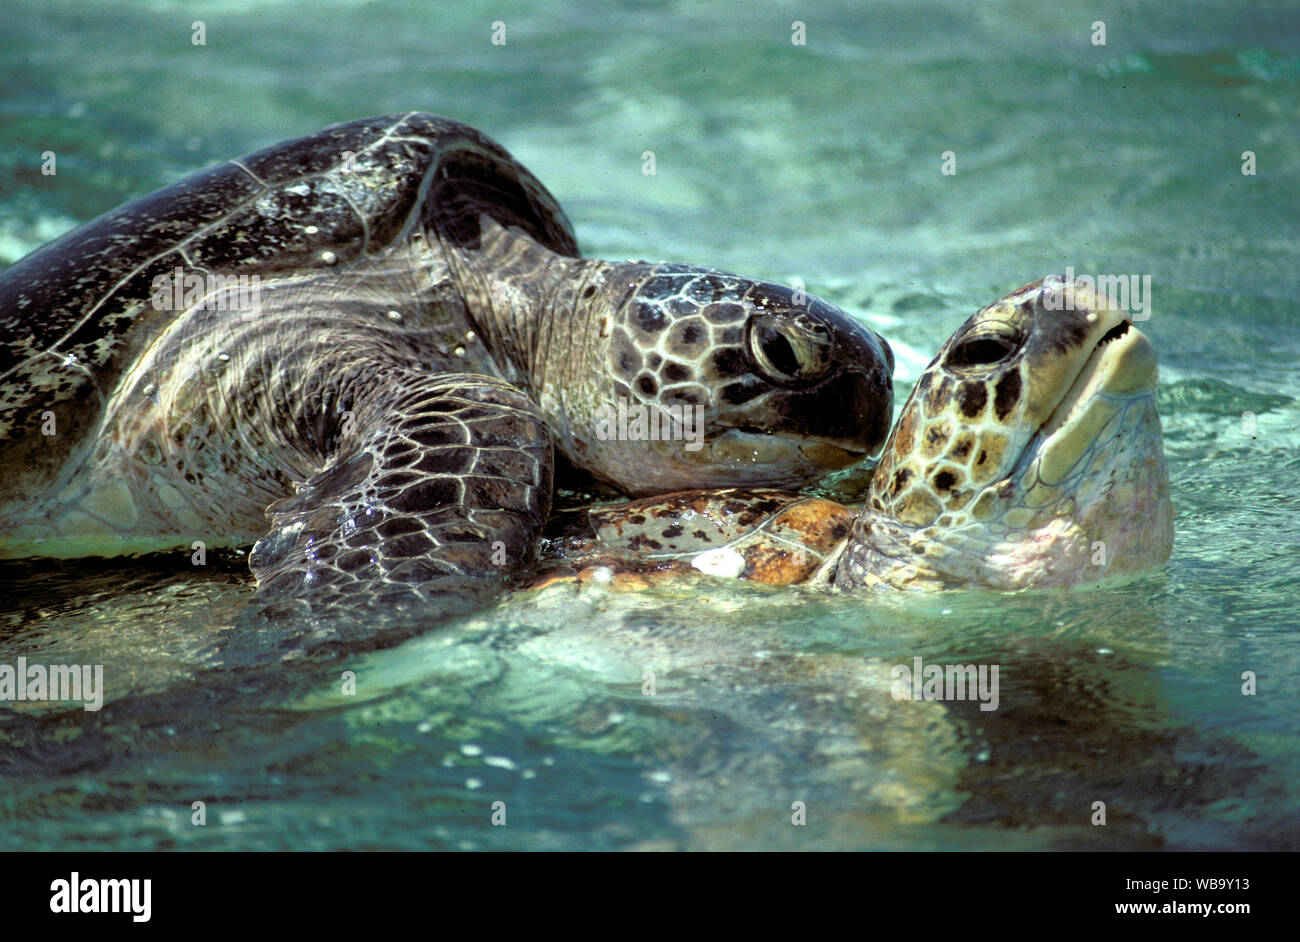 Les tortues vertes (Chelonia mydas), l'accouplement. Lady Musgrave Island, Capricornia Cays National Park, Groupe Capricorn-Bunker, Great Barrier Reef, Queensland, Banque D'Images